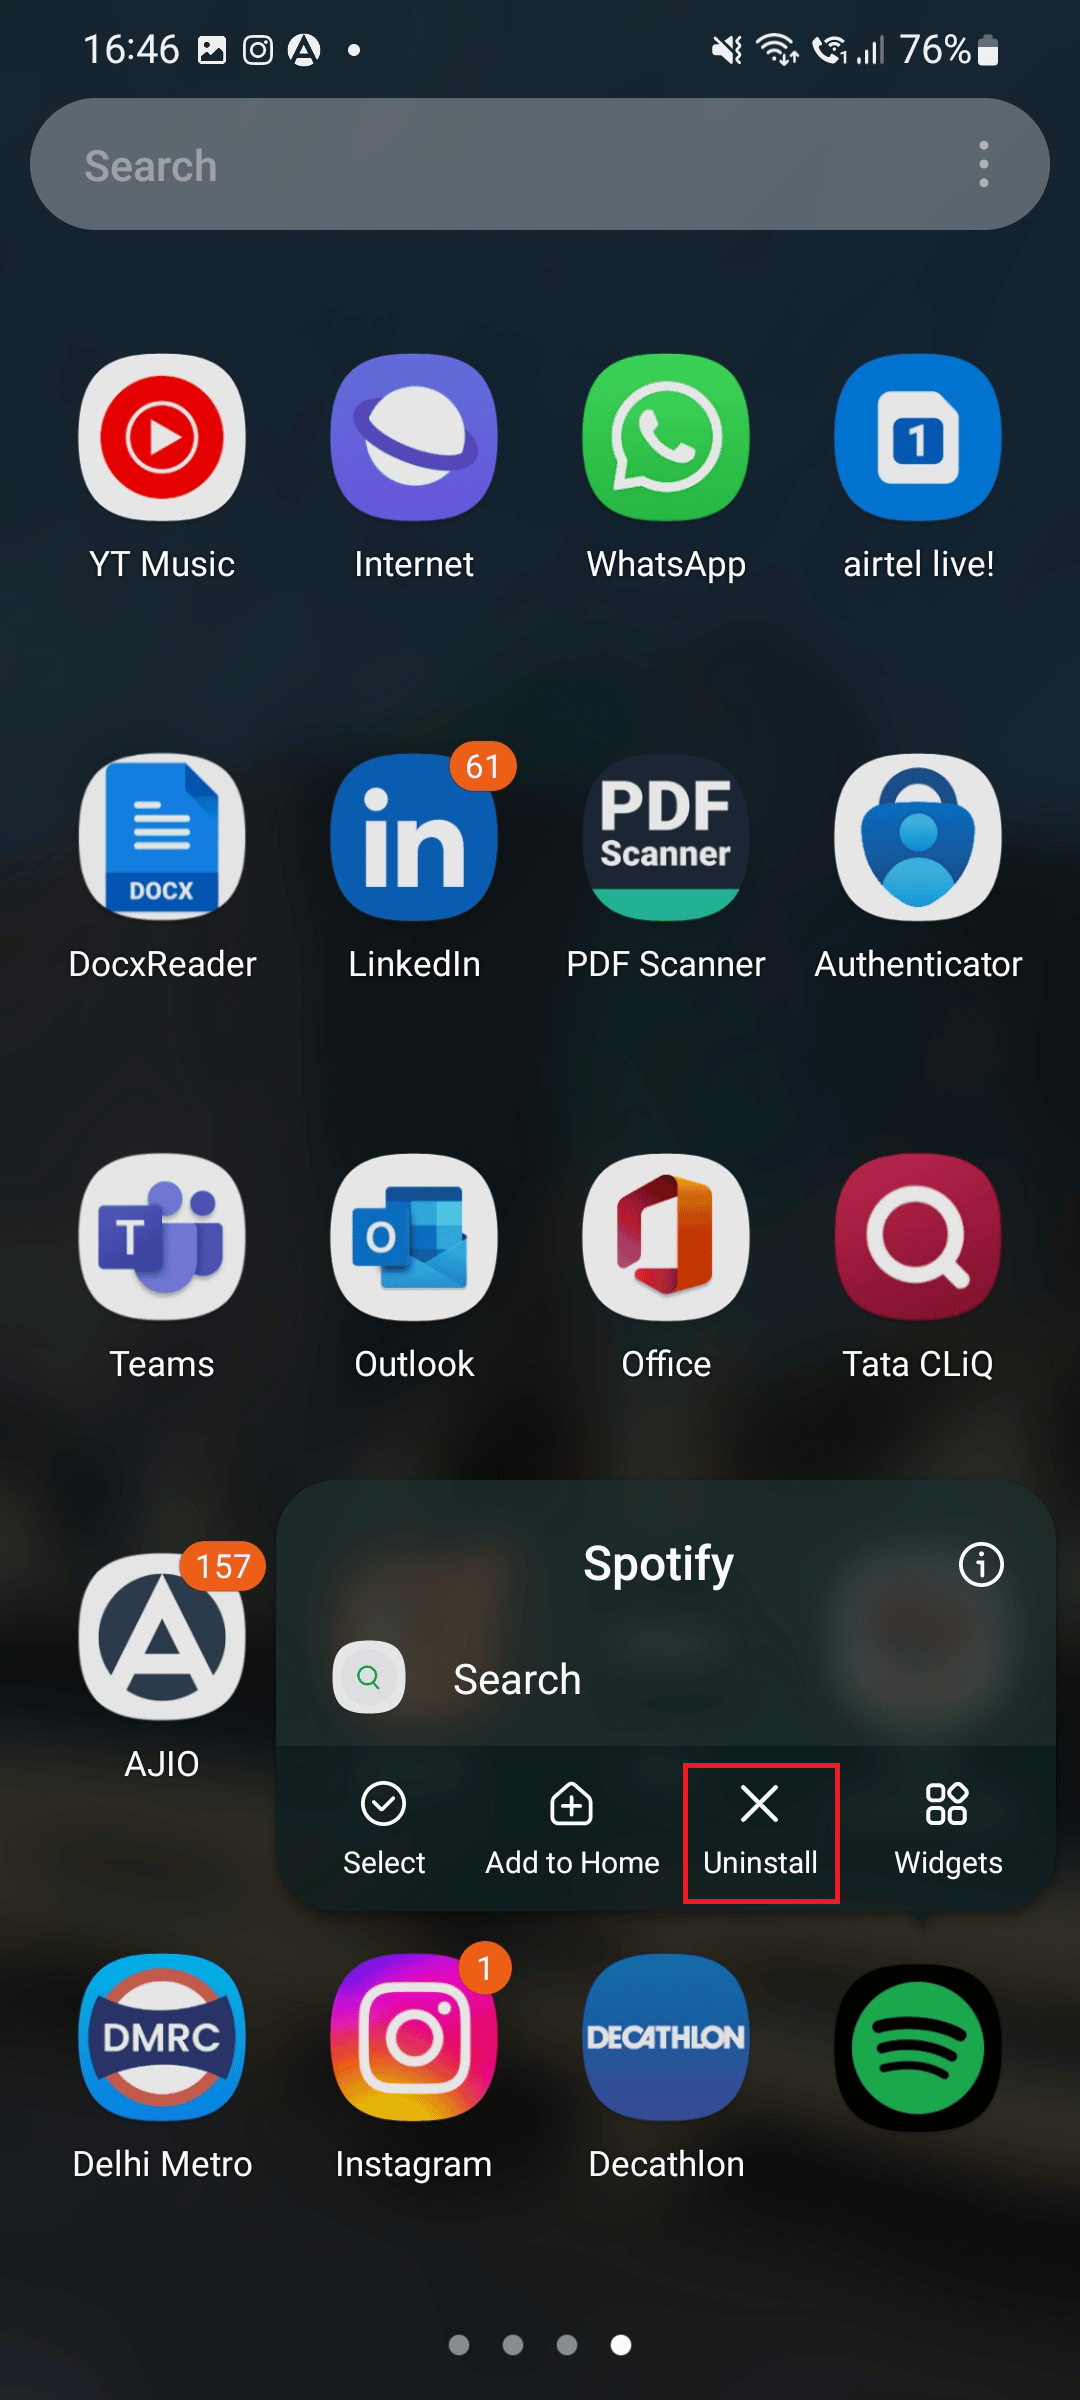 UNINSTALL OPTION FOR SPOTIFY APP ON ANDROID